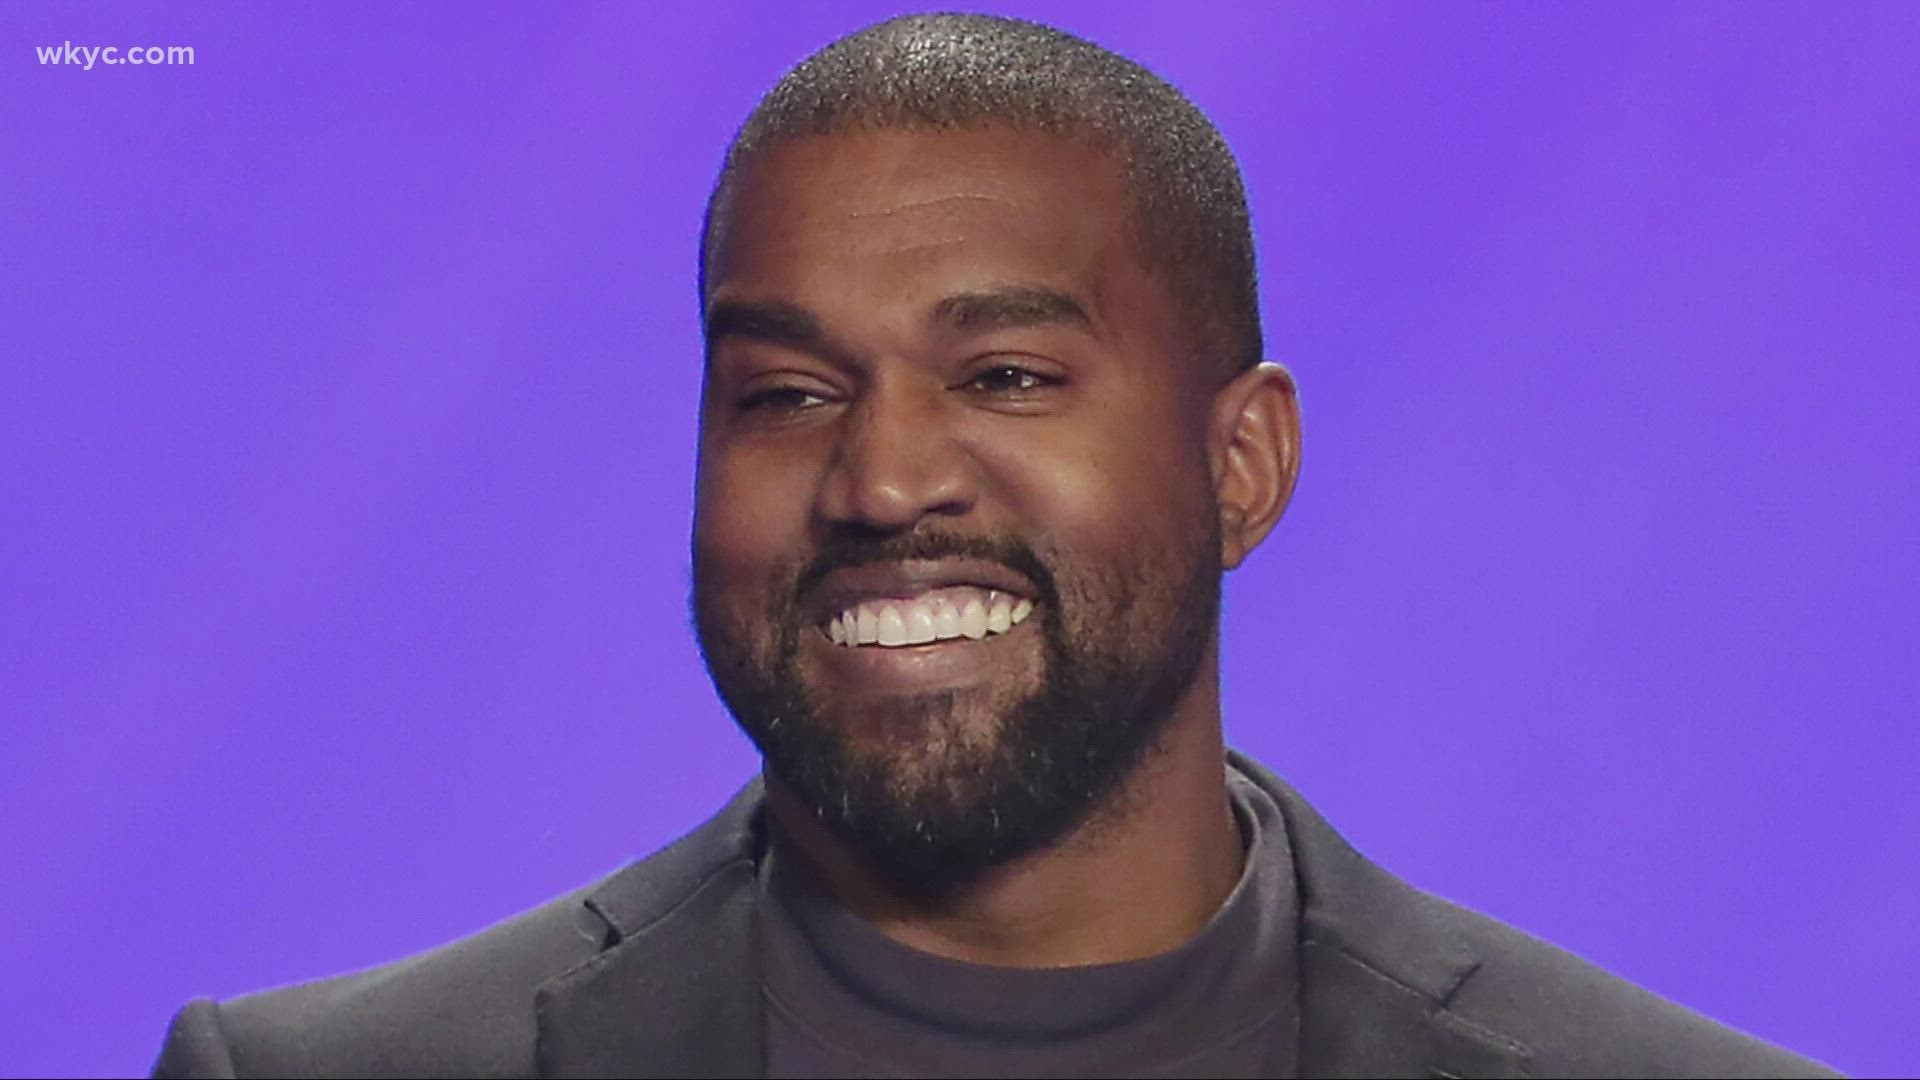 Kanye West has officially filed paperwork to go by "Ye." Plus, here are all the details on the new Andy Samberg/Maya Rudolph show coming to Peacock.